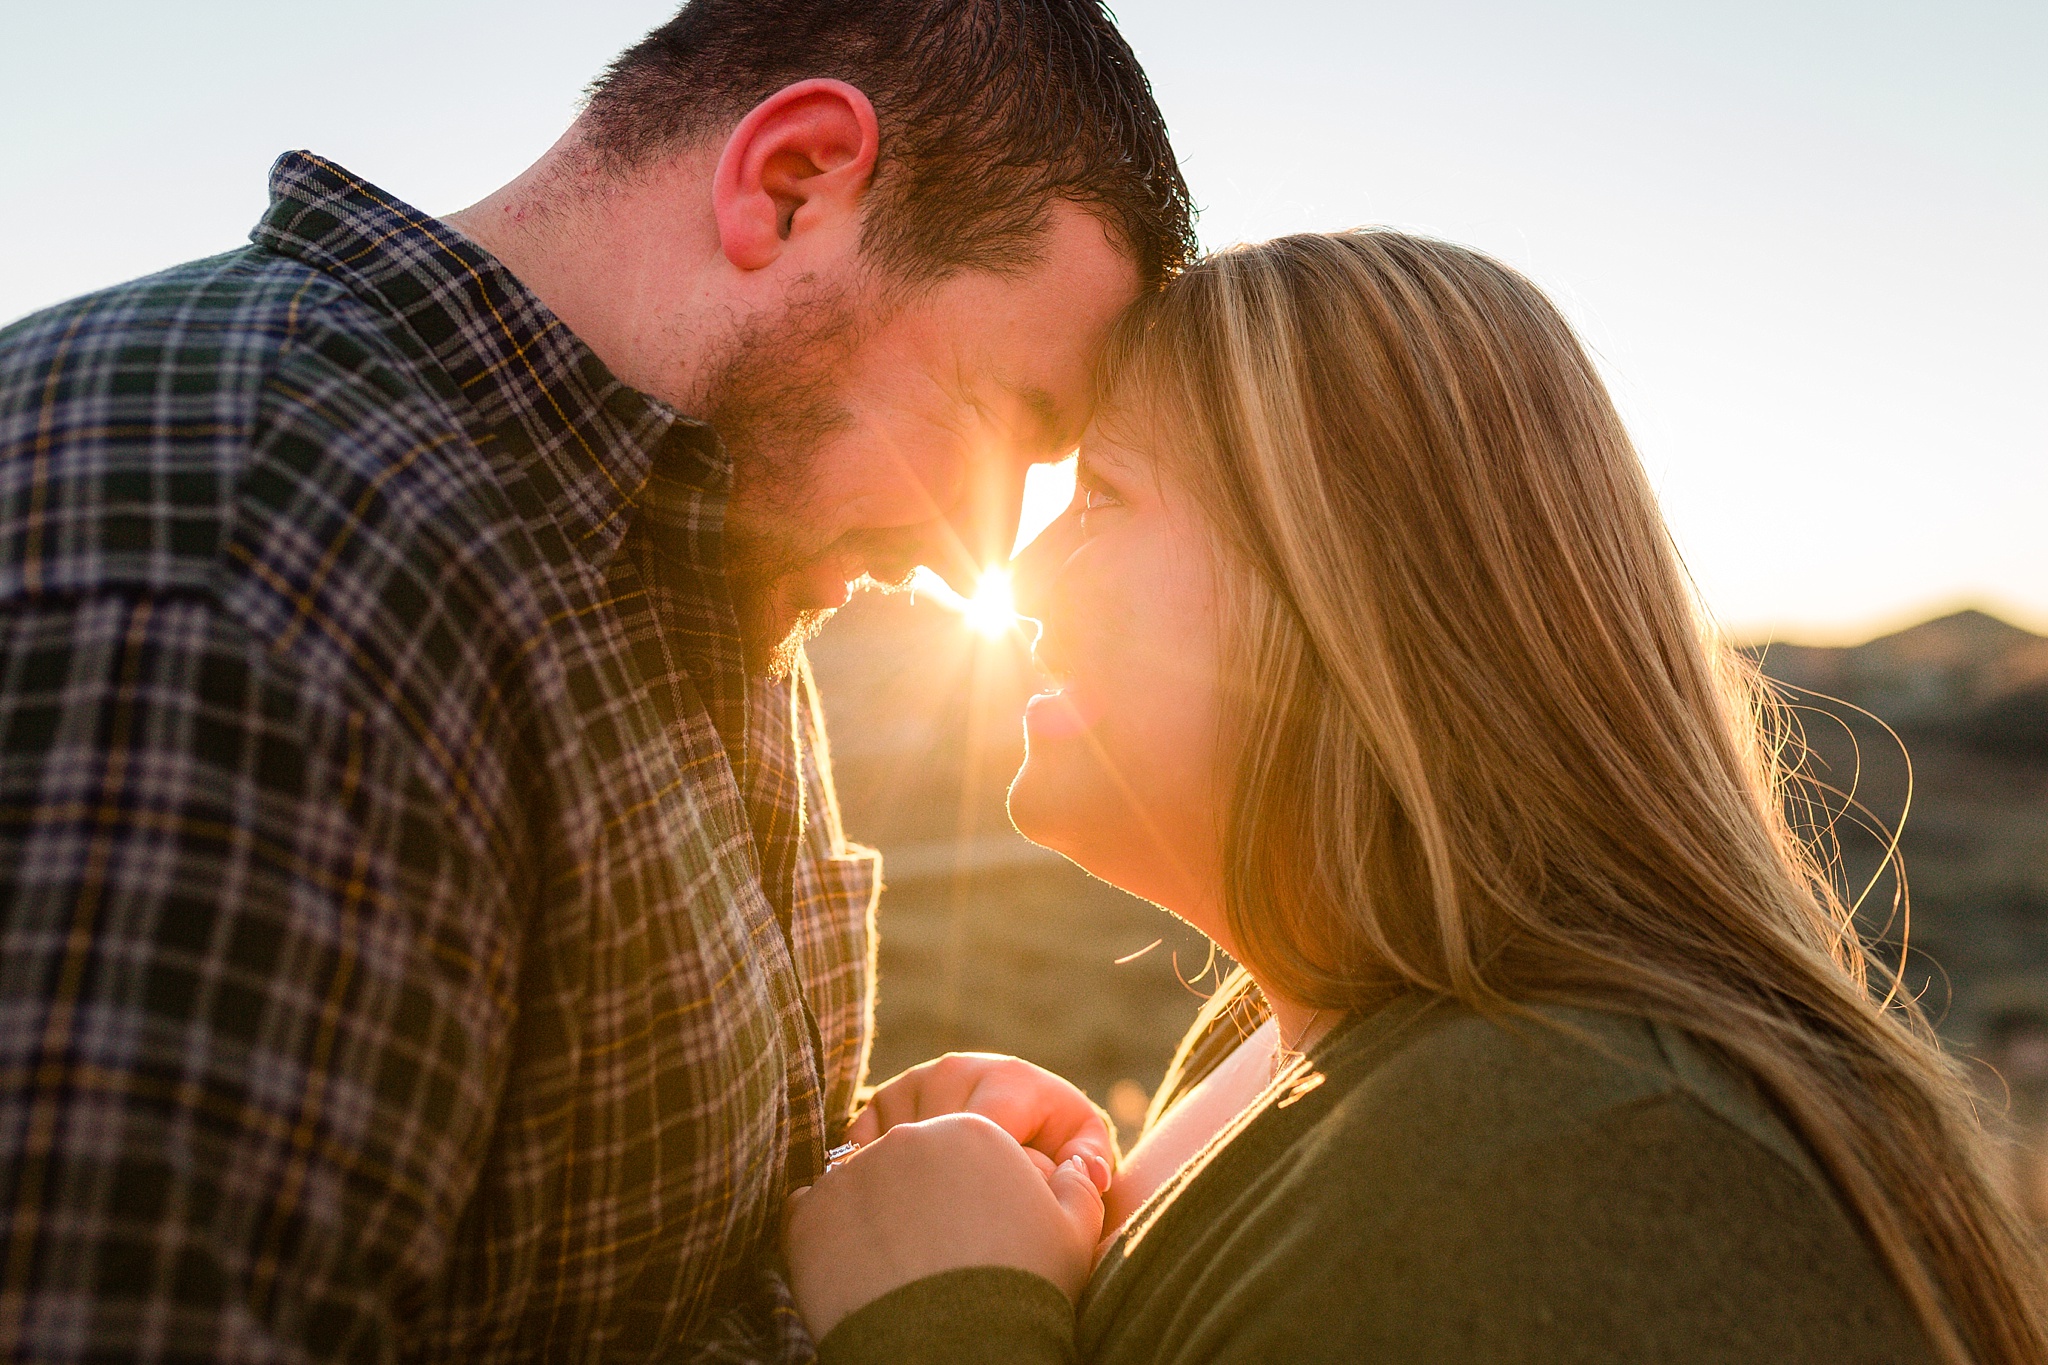 Sunrise shining through behind the couple during their Devil’s Backbone engagement session. Briana & Kevin’s Devil’s Backbone and Sweetheart Lanes Engagement Session by Colorado Engagement Photographer, Jennifer Garza. Devil's Backbone Engagement, Devil's Backbone Engagement Session, Loveland Engagement Session, Colorado Engagement Photography, Colorado Engagement Photos, Sweetheart Lanes Bowling Alley, Bowling Alley Engagement, Bowling Engagement Session, Bowling Engagement Photography, Wedding Inspo, Colorado Wedding, Colorado Bride, Brides of Colorado, Bride to Be, Couples Goals